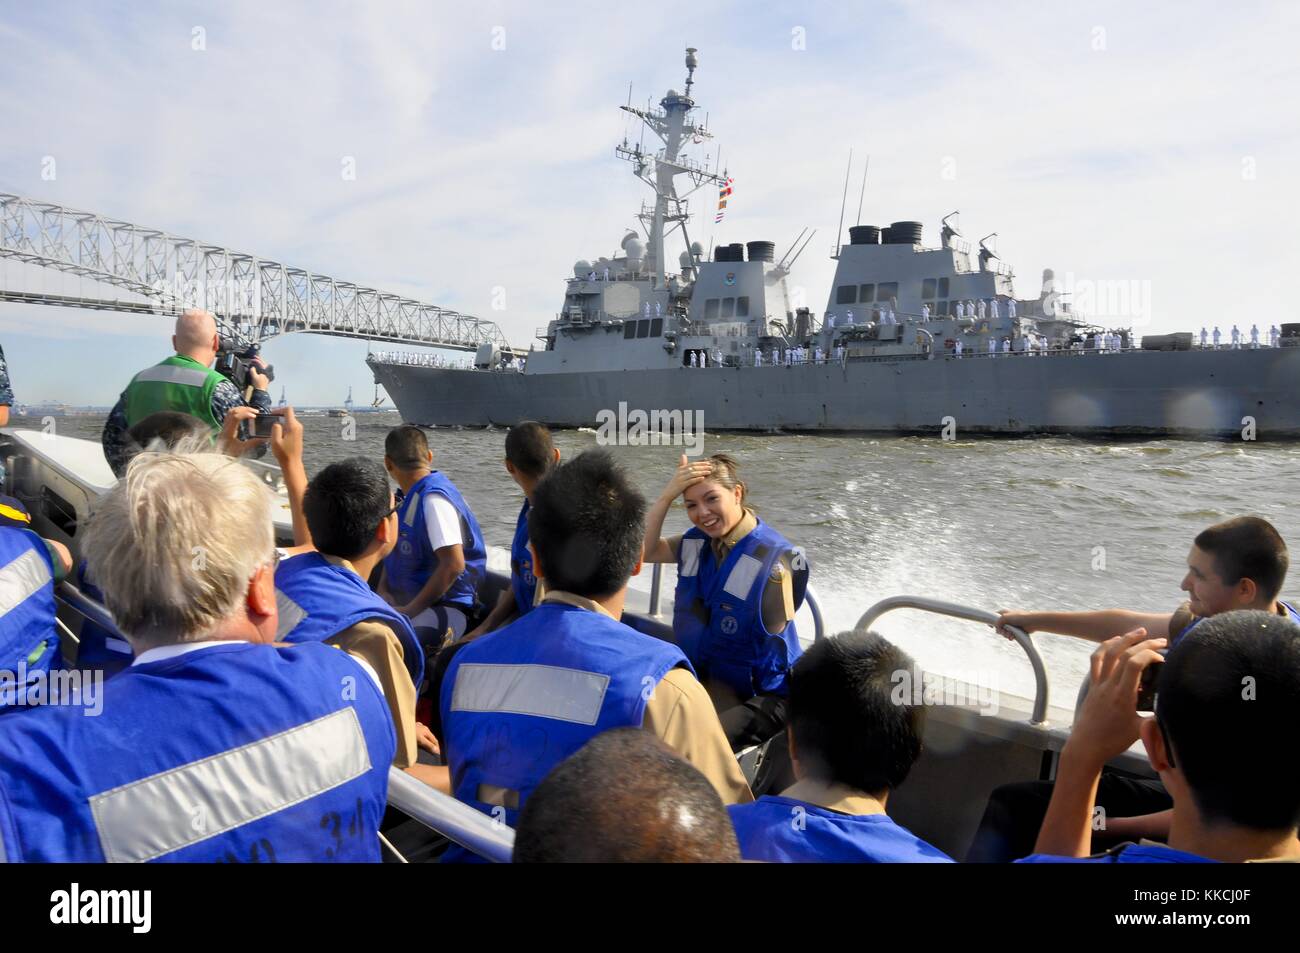 Navy ROTC cadets from Gaithersburg, Maryland, enjoy a front row view of the guided-missile destroyer USS Donald Cook DDG 75 as it approaches Francis Scott Key Bridge during its arrival to Baltimore Harbor to participate in Baltimore Navy Week 2012, Baltimore, Maryland, 2012. Image courtesy Mass Communication Specialist 1st Class Jeremy K. Johnson/US Navy. Stock Photo